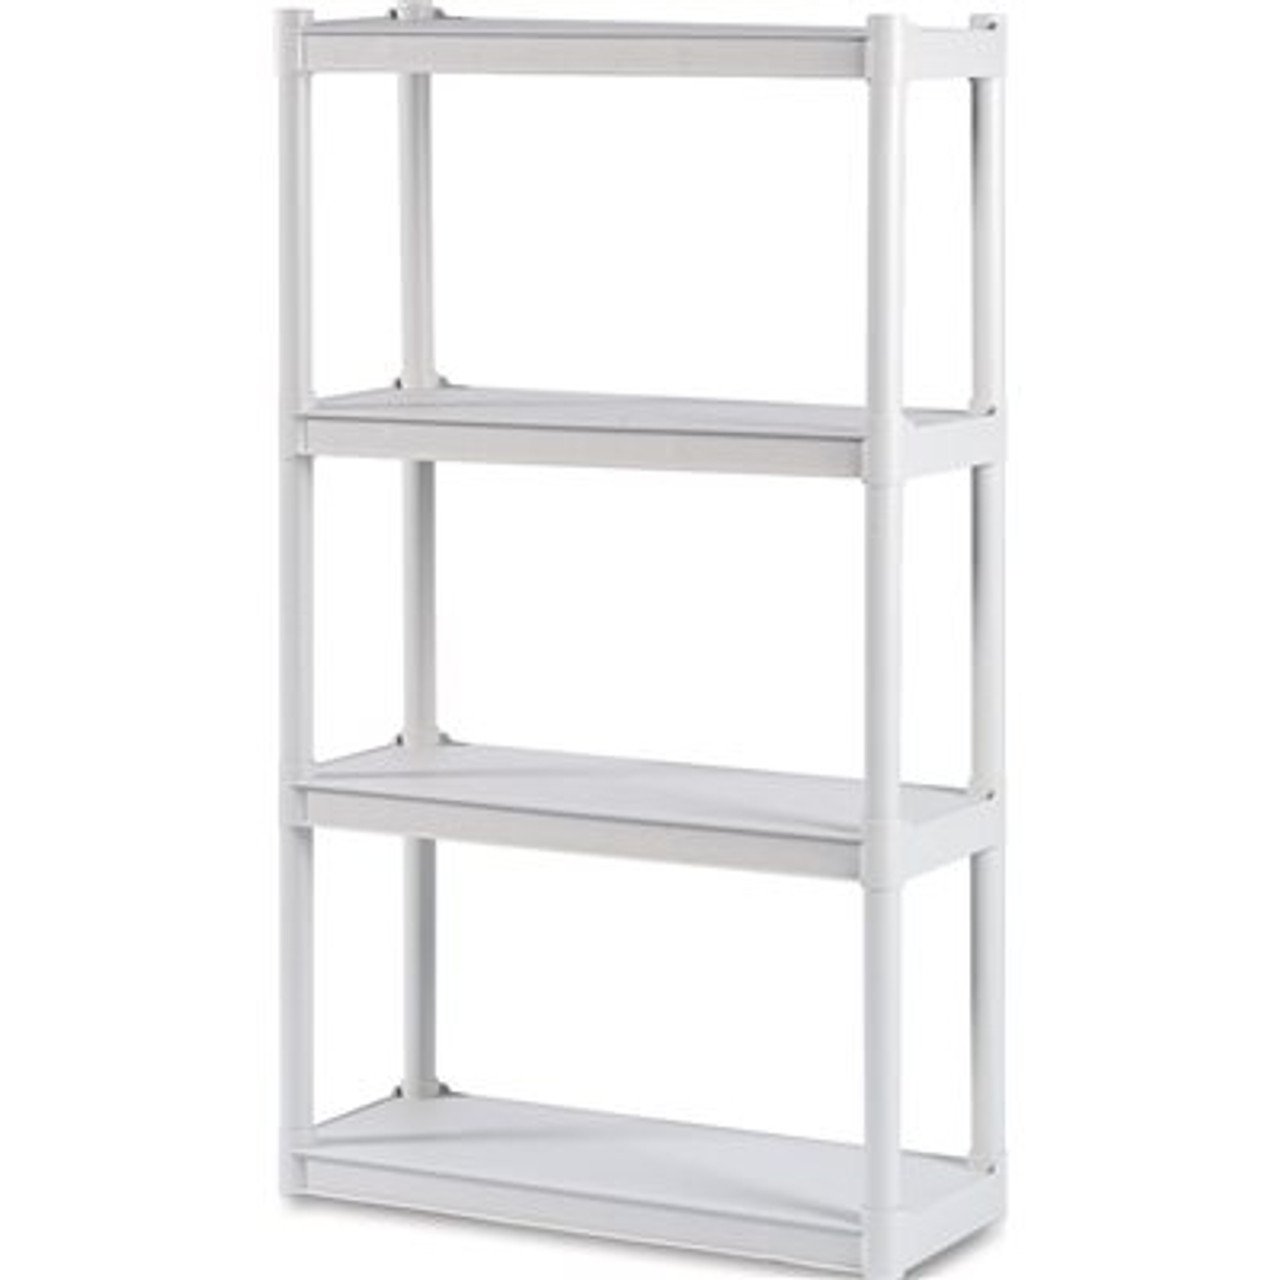 Iceberg Rough 'N Ready 32 in. W x 13 in. D x 54 in. H Platinum Resin 4 Tier Open Storage System